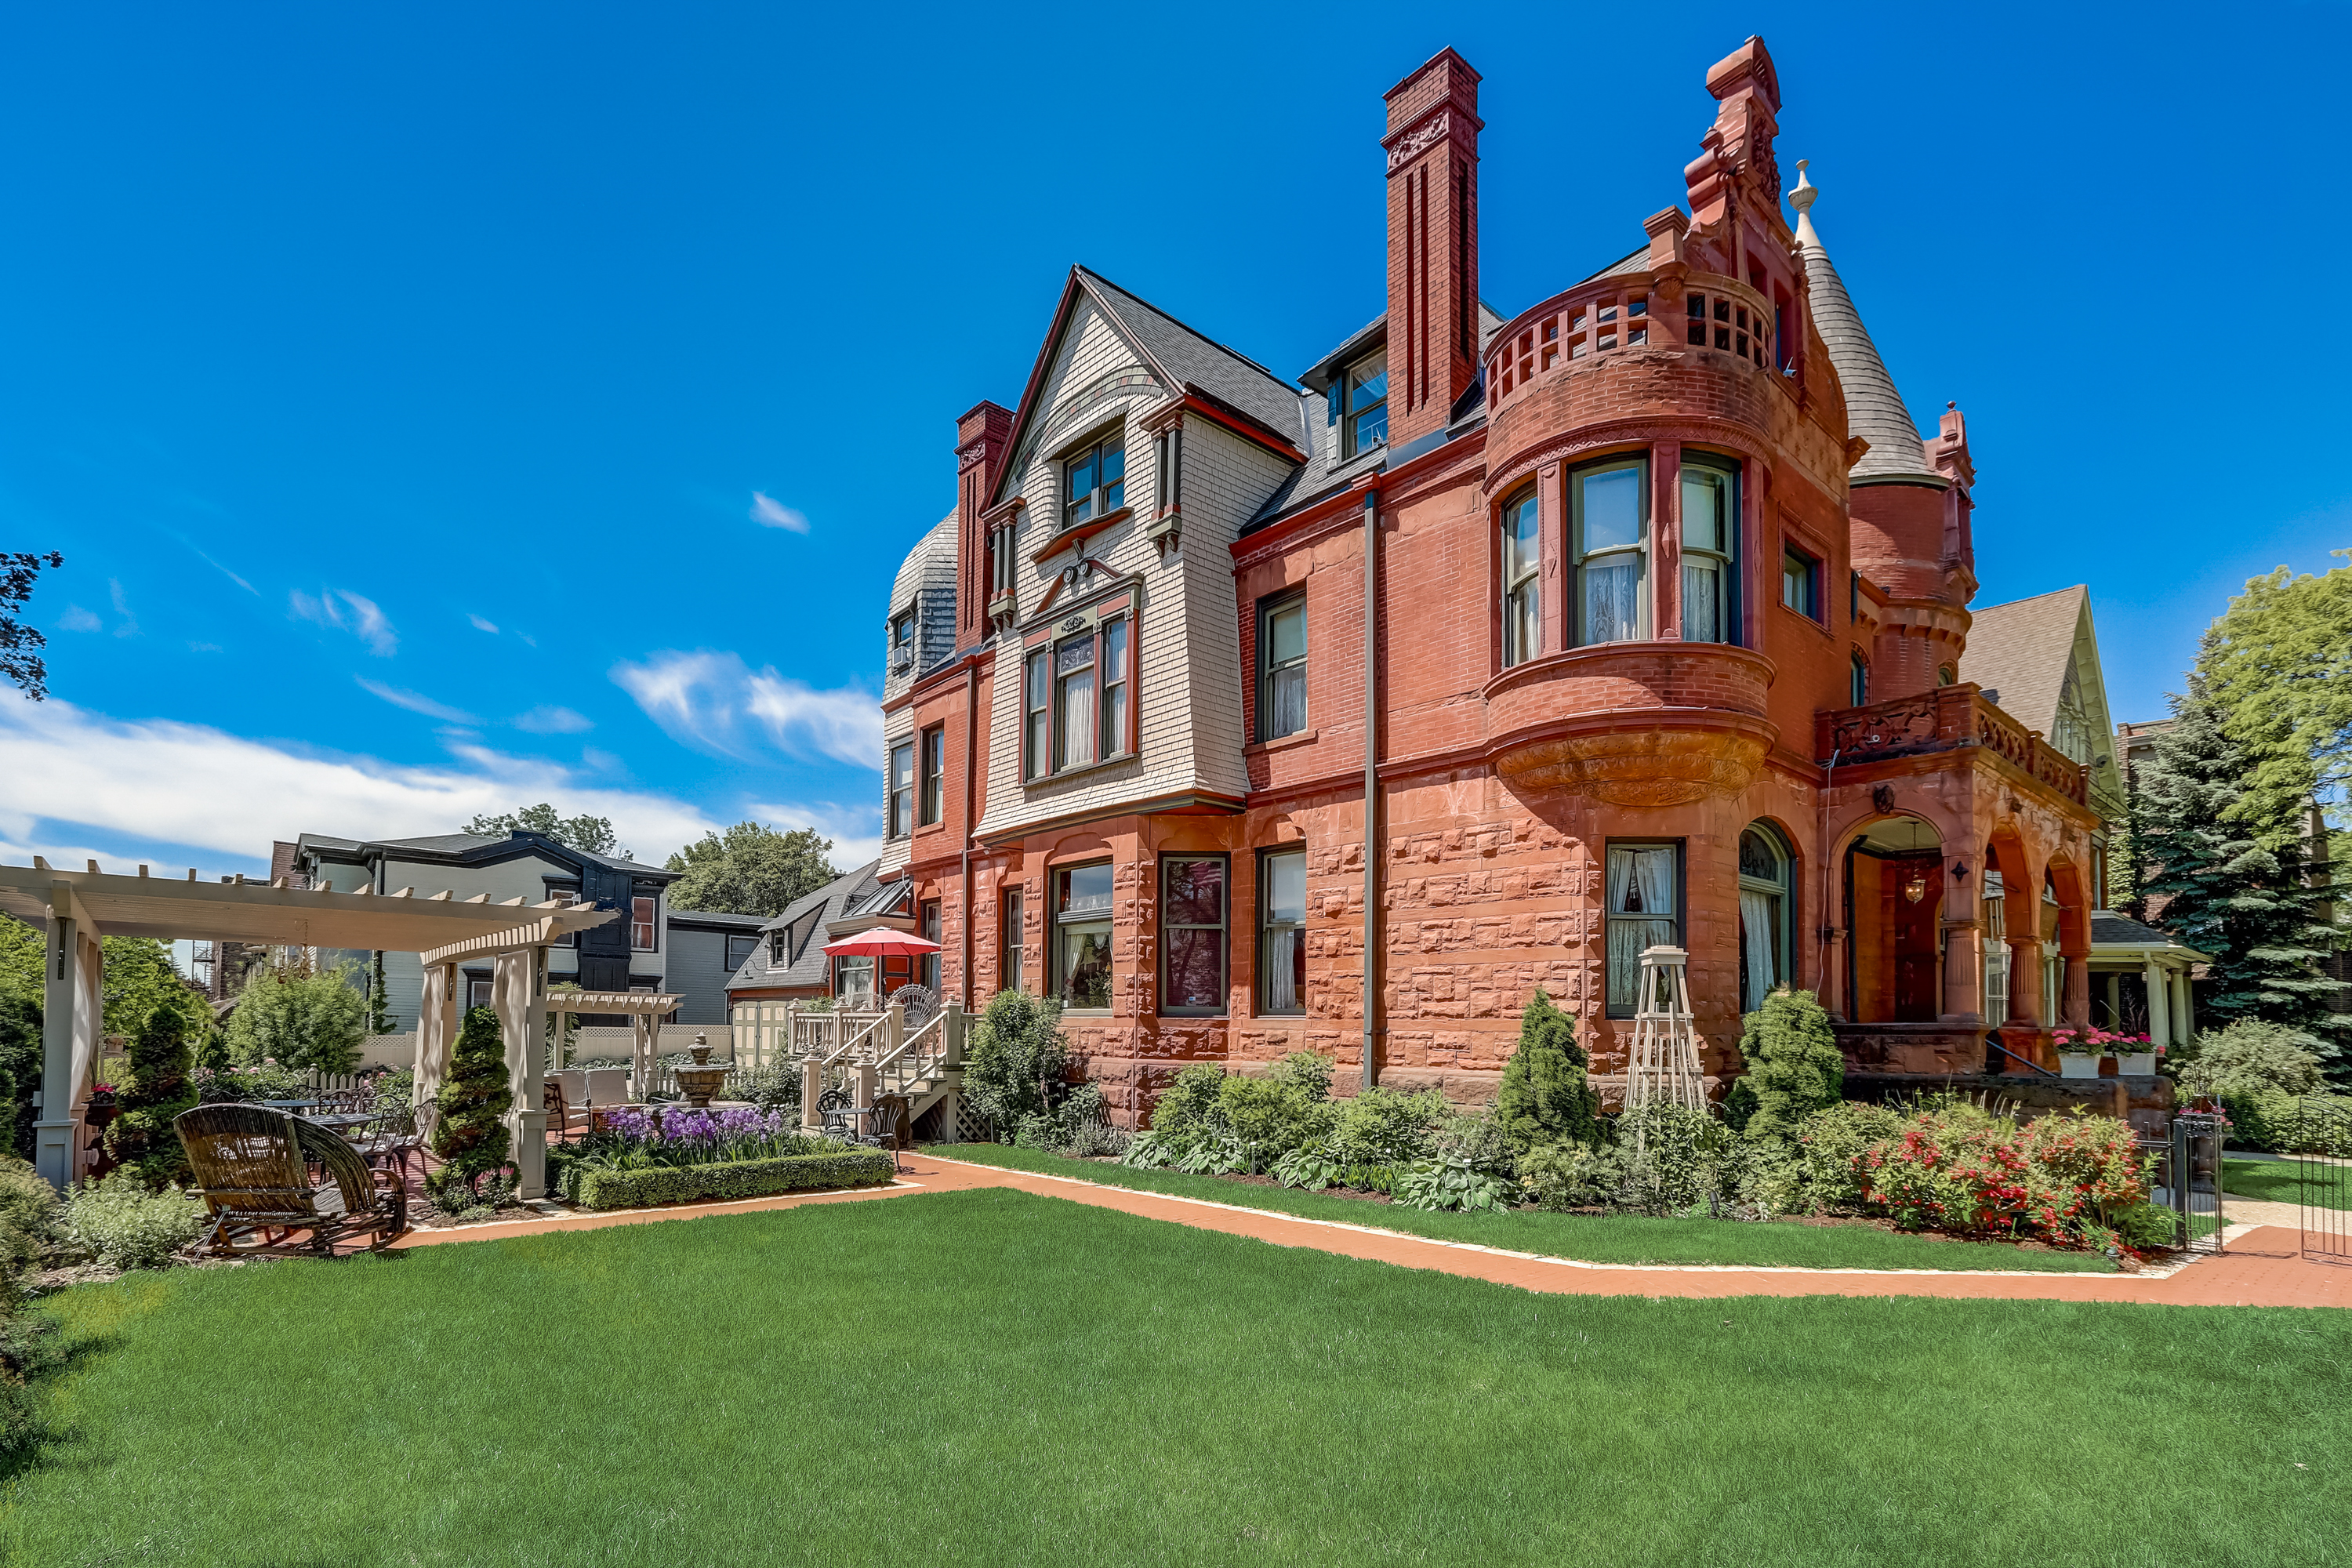 Wisconsin bed and breakfast inn for sale - Schuster Mansion Bed & Breakfast